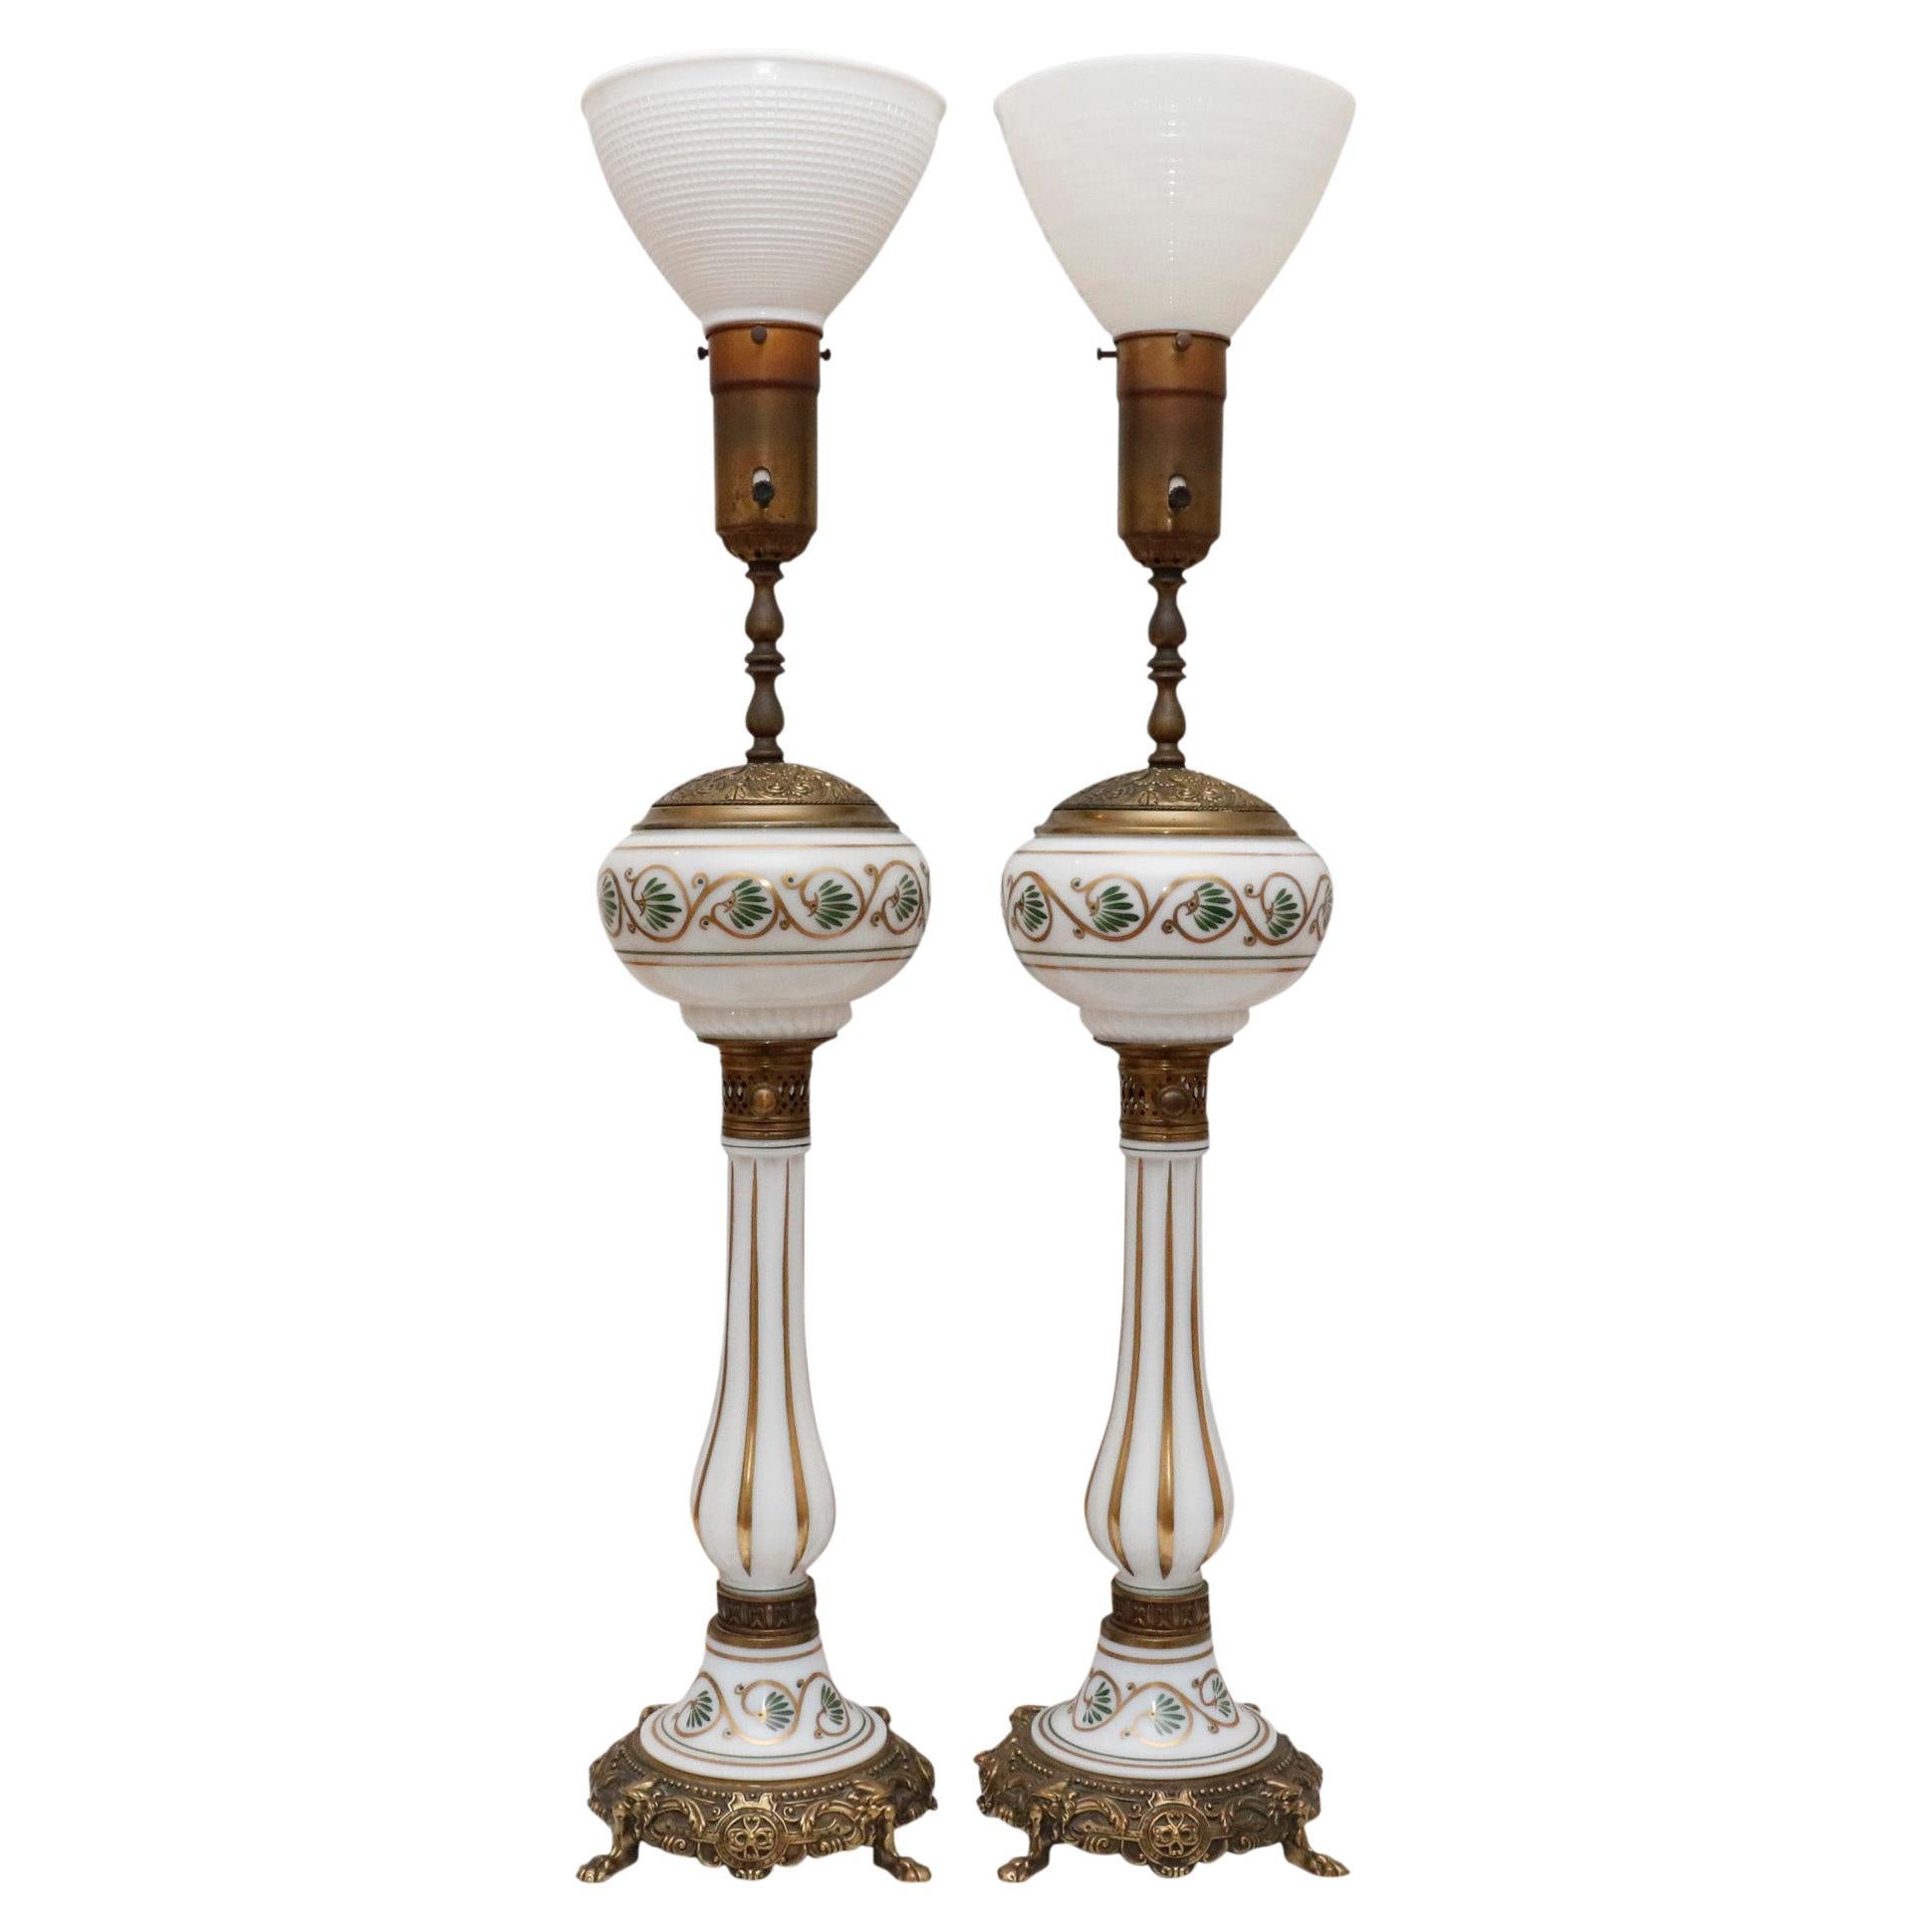 Monumental Glass & Brass Uplighter Table Lamps, a Pair